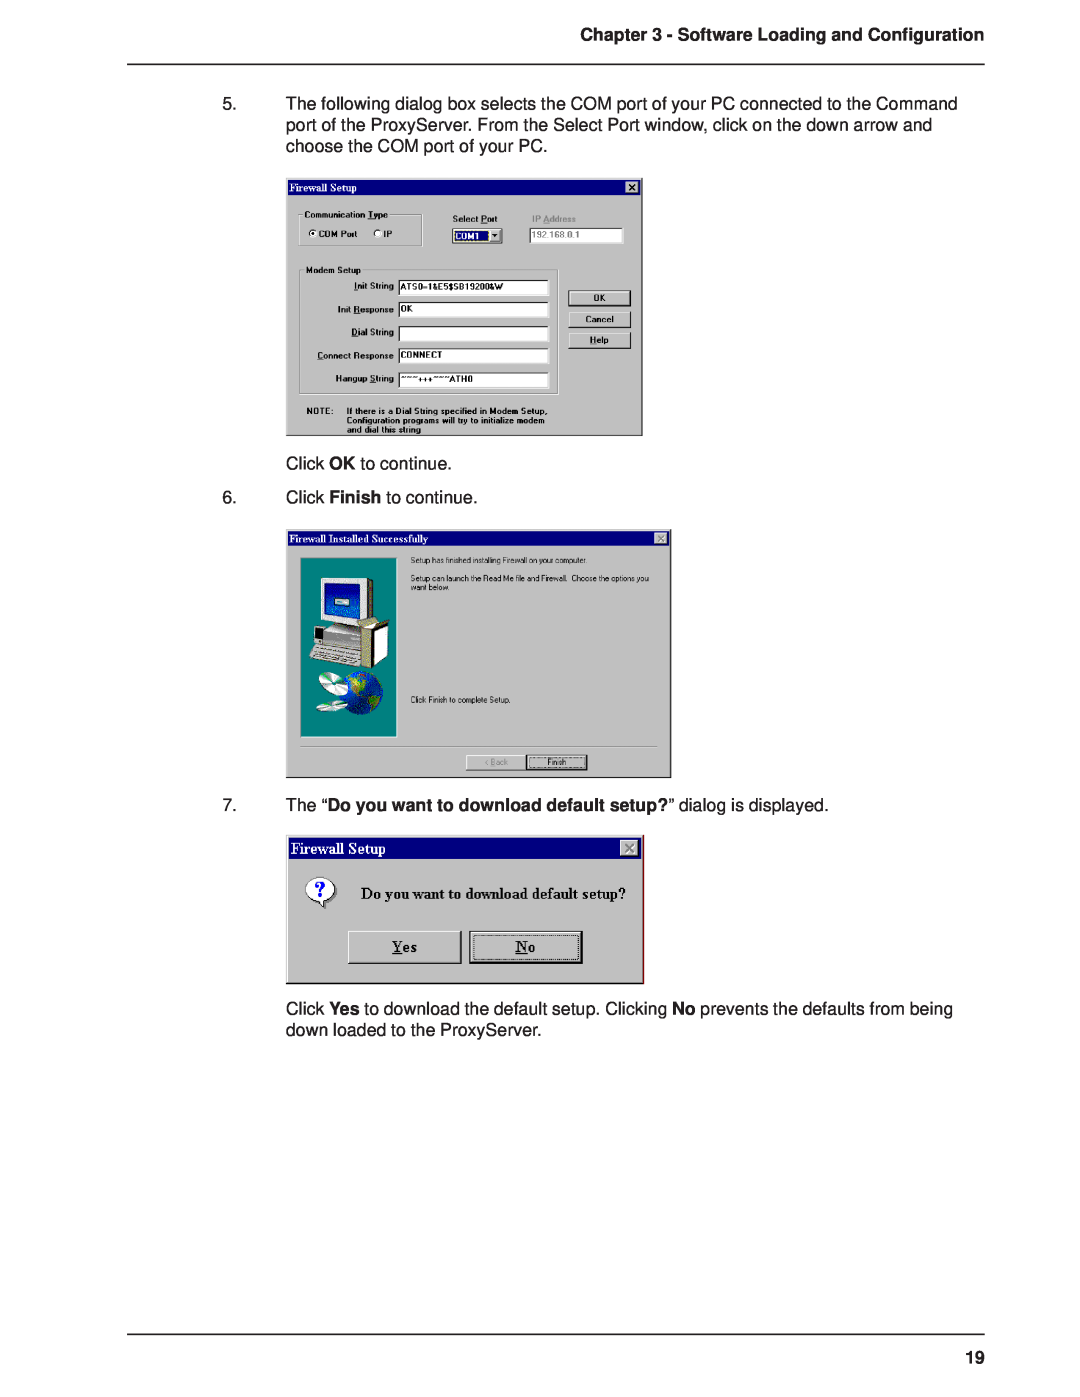 Multitech MTPSR1-120 Software Loading and Configuration, The “Do you want to download default setup?” dialog is displayed 